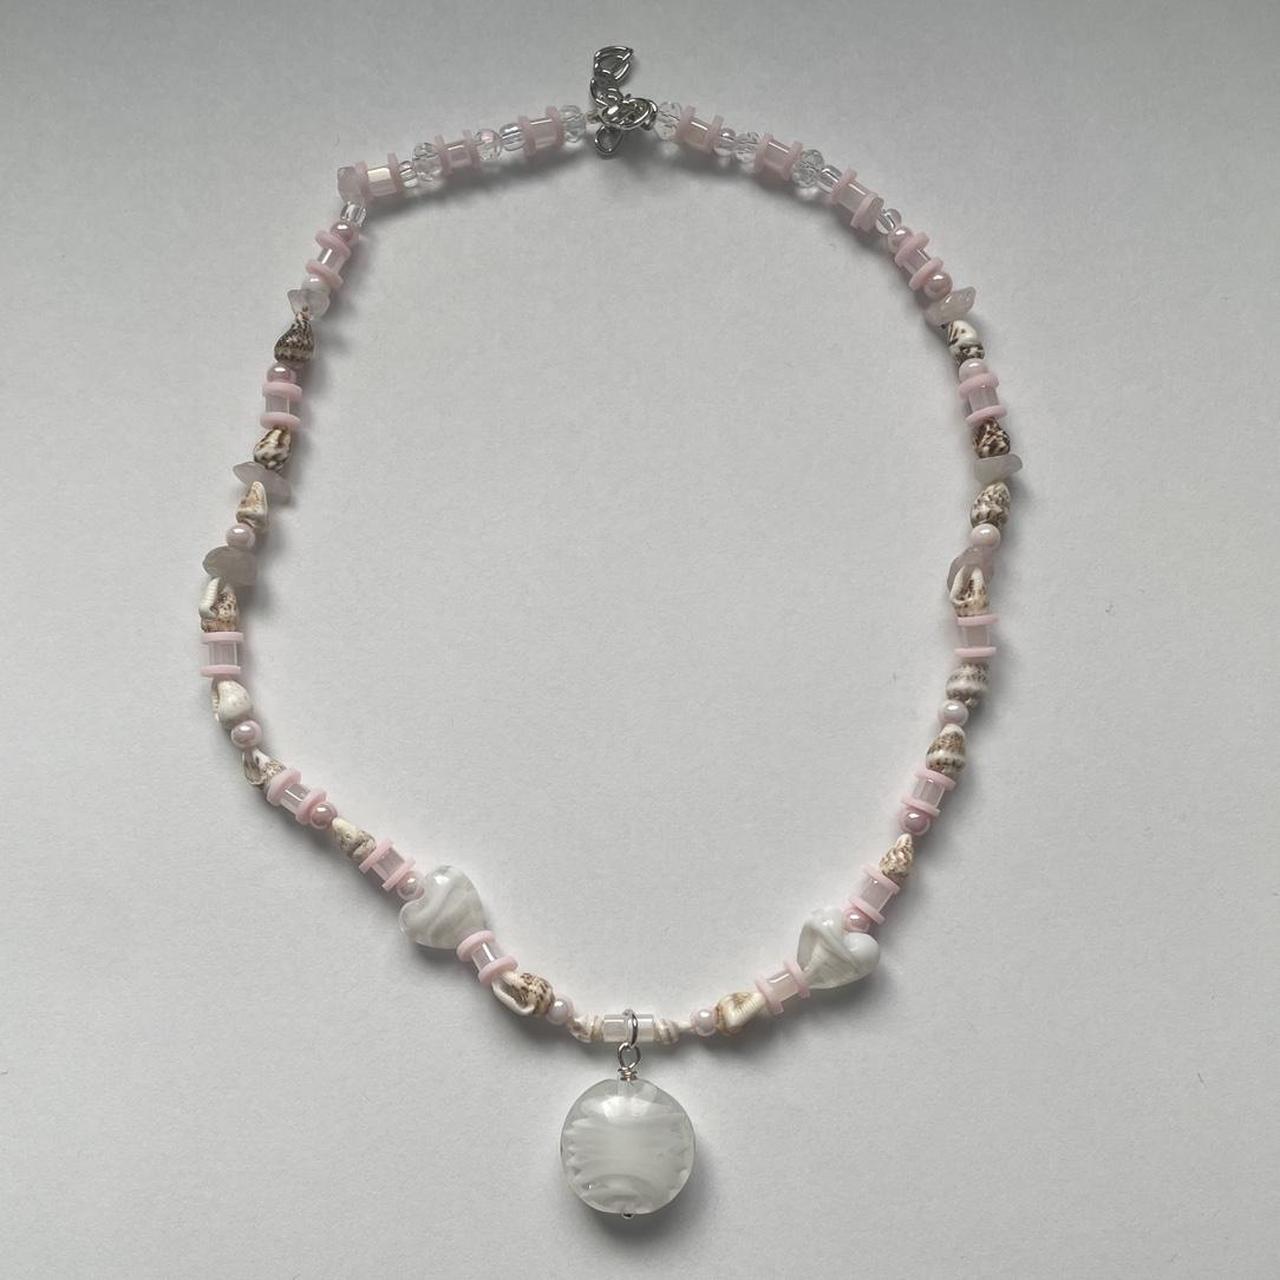 handmade, pearls, pink and white glass beads coquette necklace